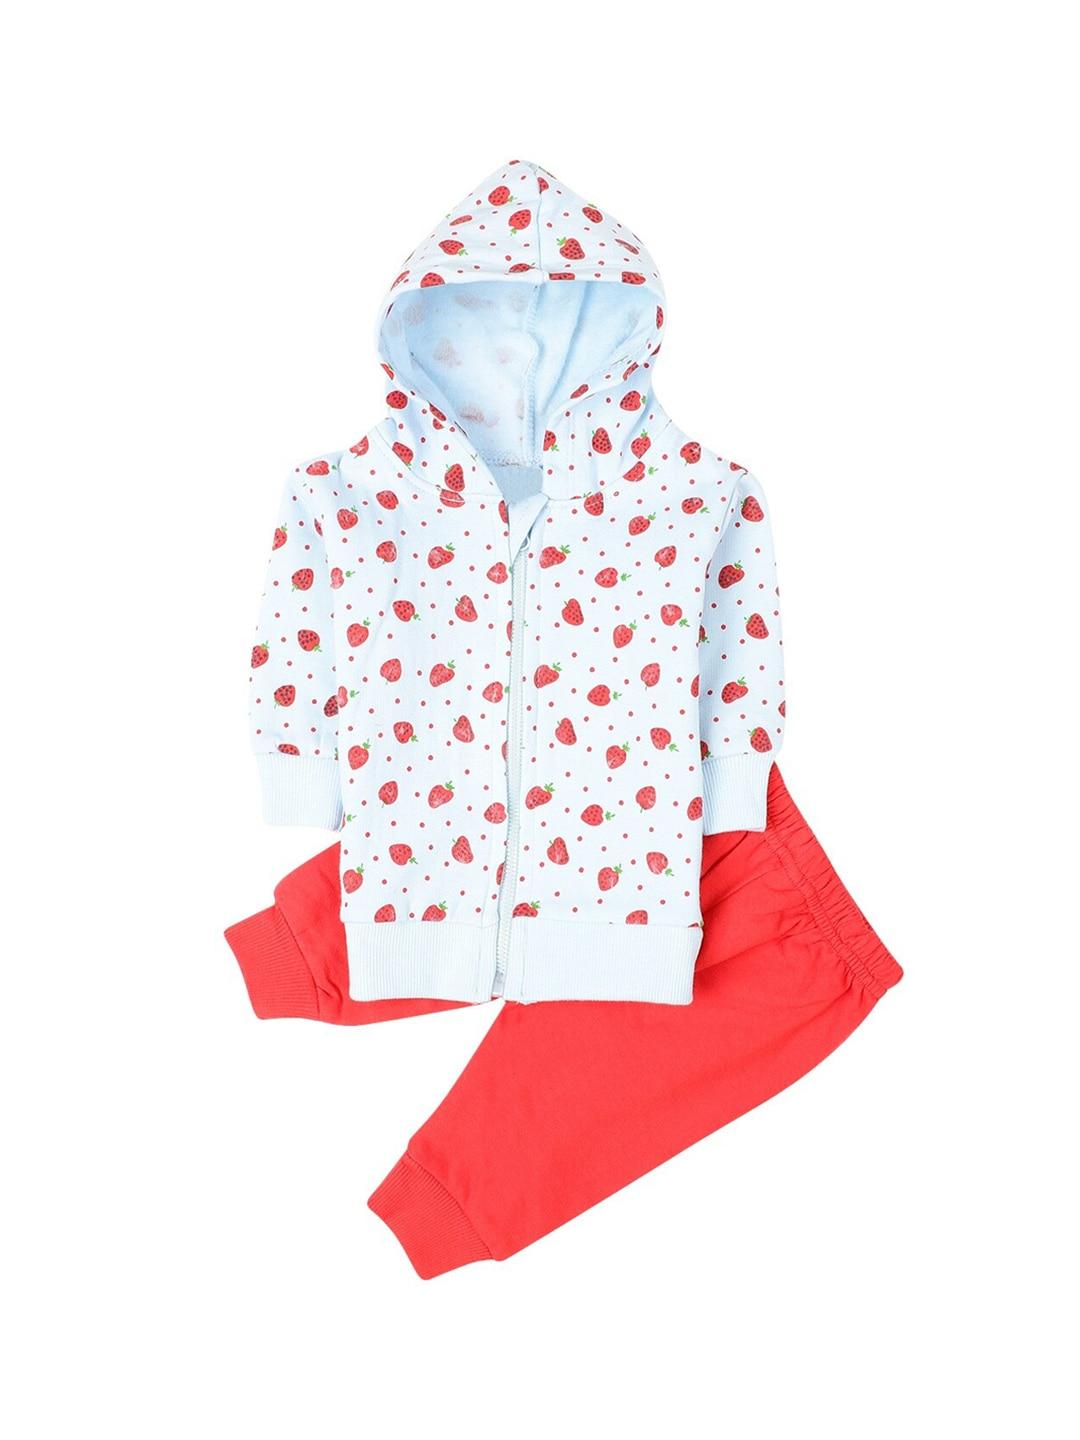 v-mart-unisex-kids-blue-&-red-printed-cotton-fleece-hooded-neck-t-shirt-with-trousers